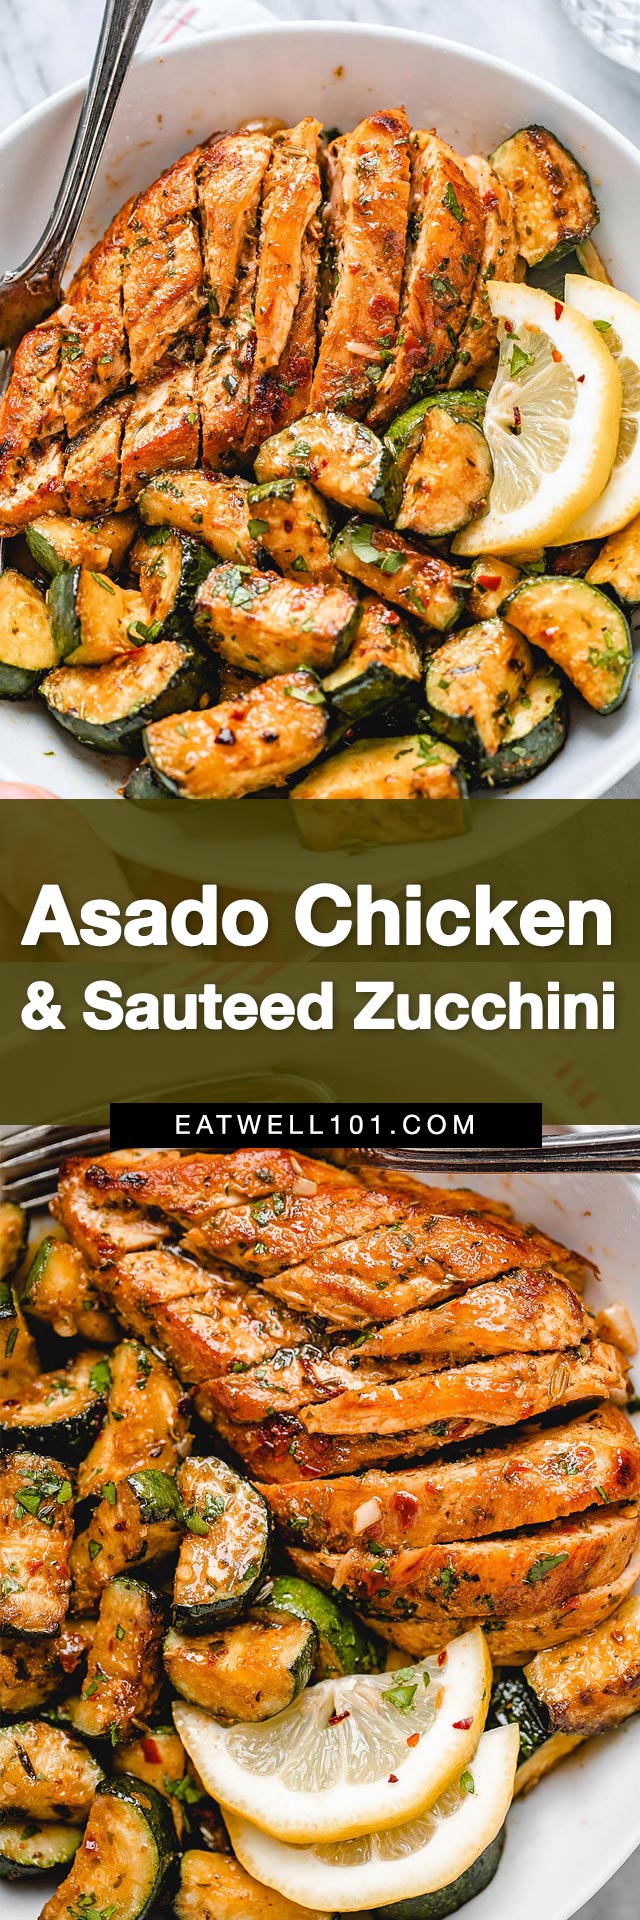 Asado Chicken and Sautéed Lemon Zucchini - #chicken #recipe #eatwell101 - Juicy and flavorful, this healthy chicken recipe is perfect for summer BBQ, memorial day cookout or any weeknight dinner. 